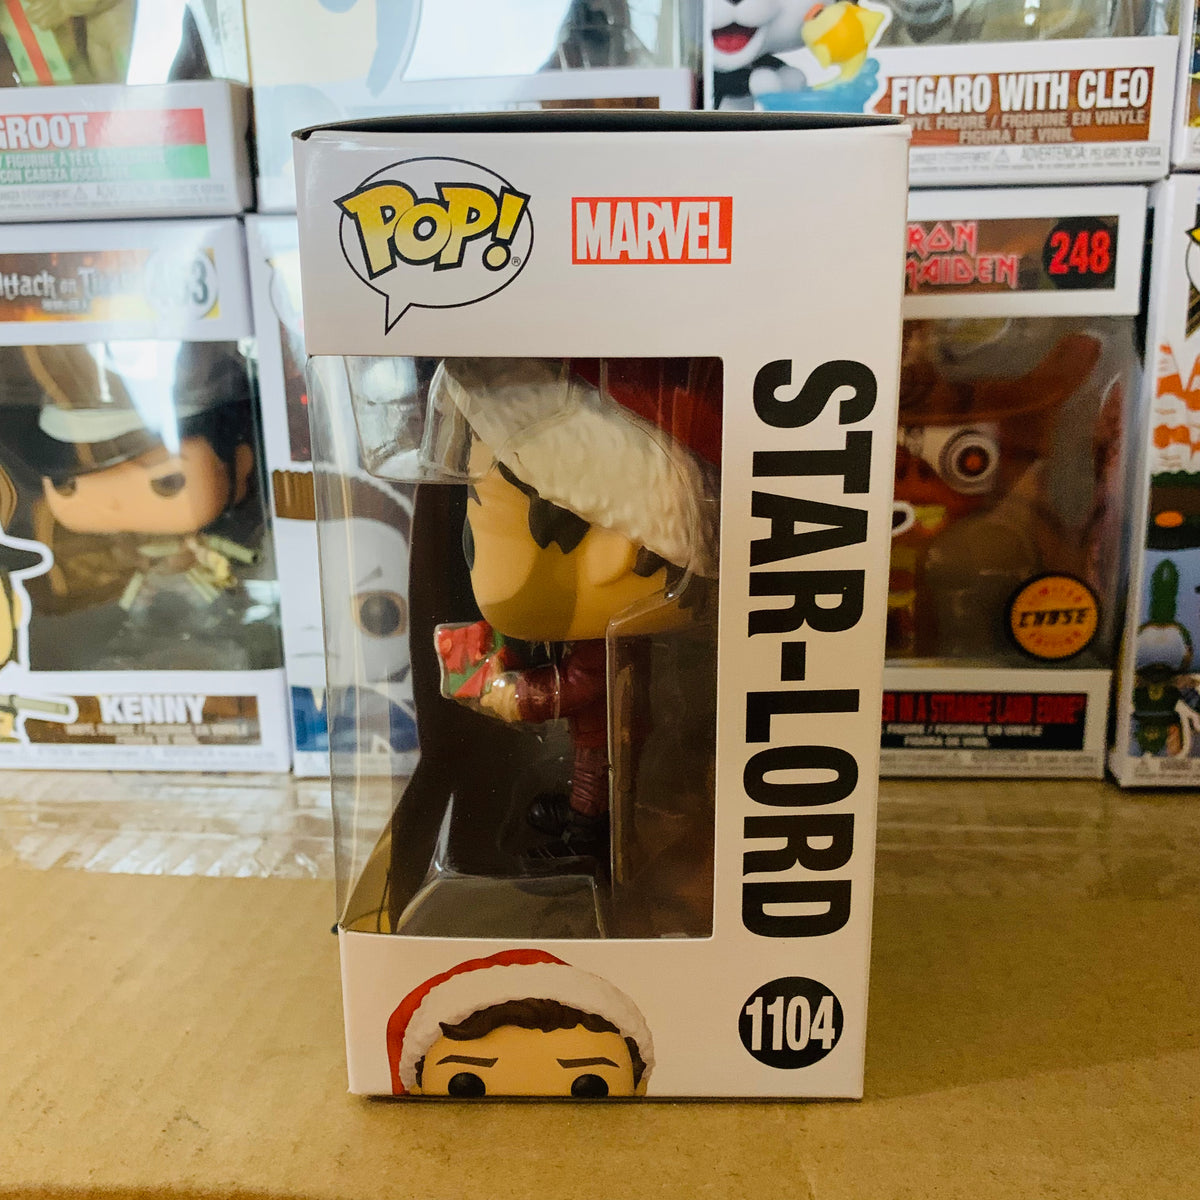 The Guardians of the Galaxy Holiday Special Star-Lord Funko Pop Figure